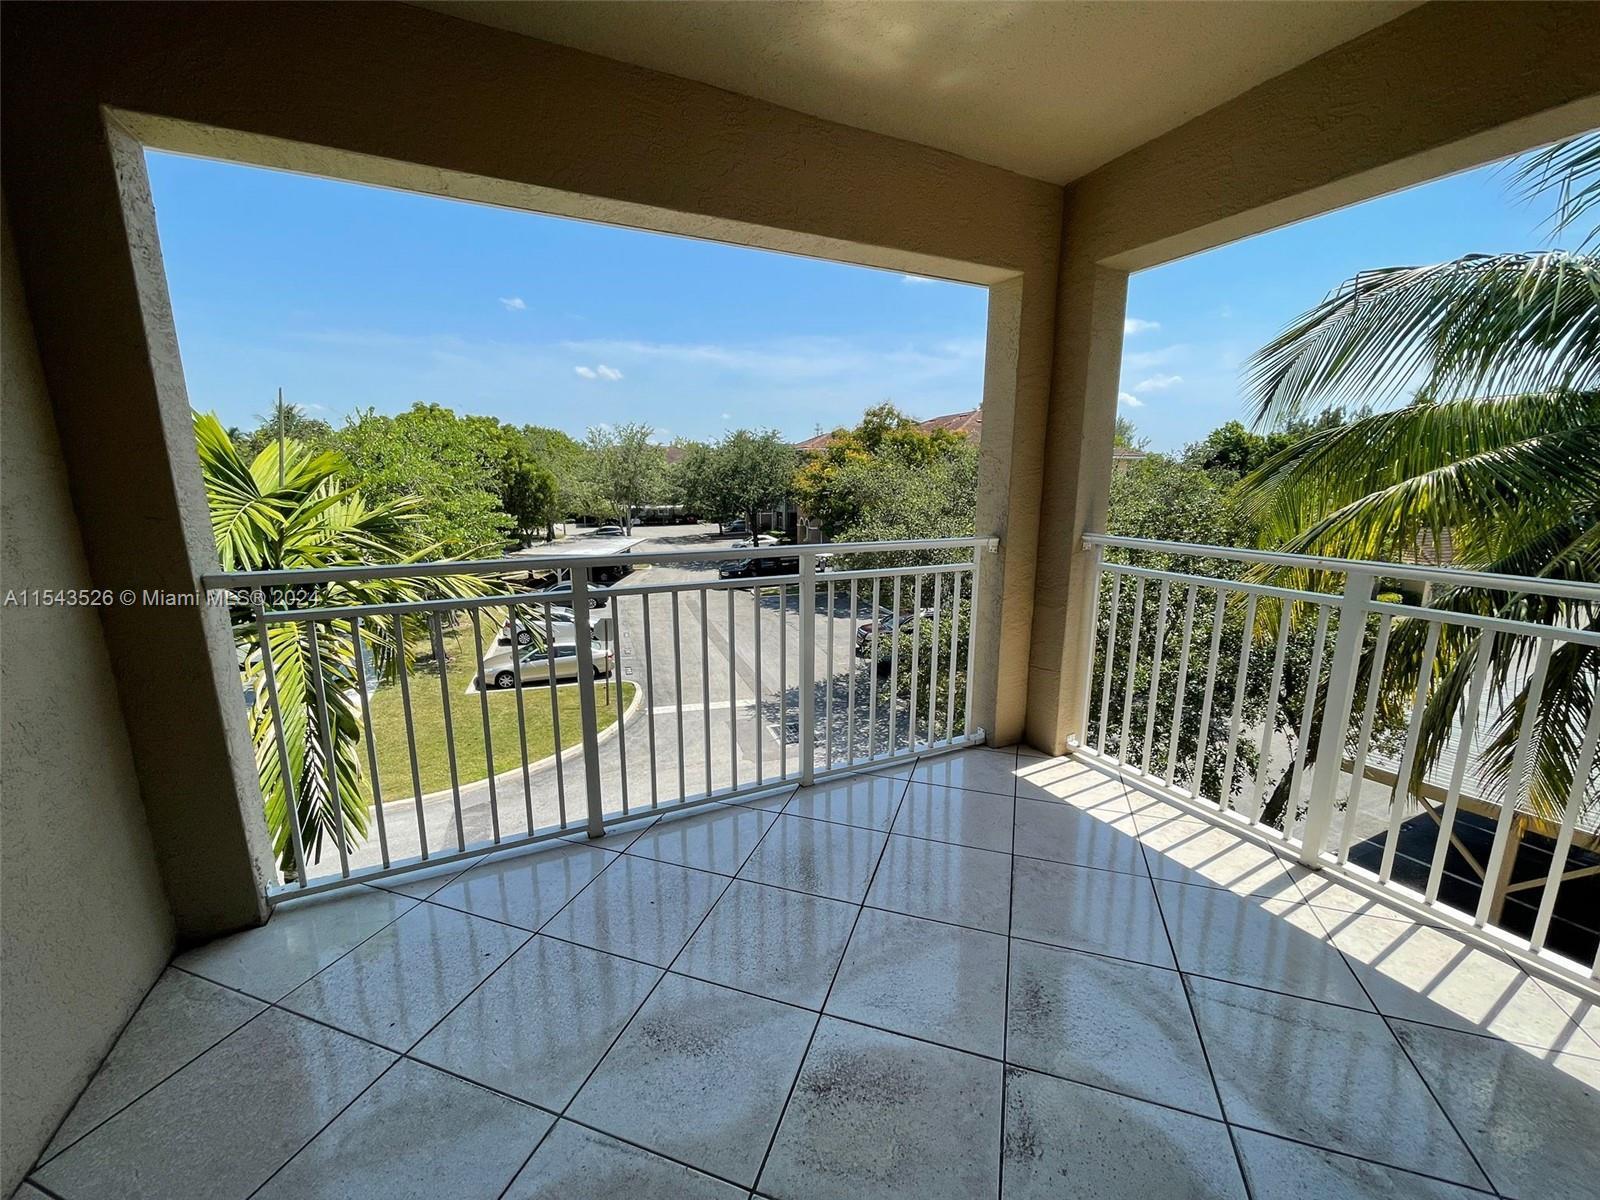 Photo of 6418 Emerald Dunes Dr #301 in West Palm Beach, FL